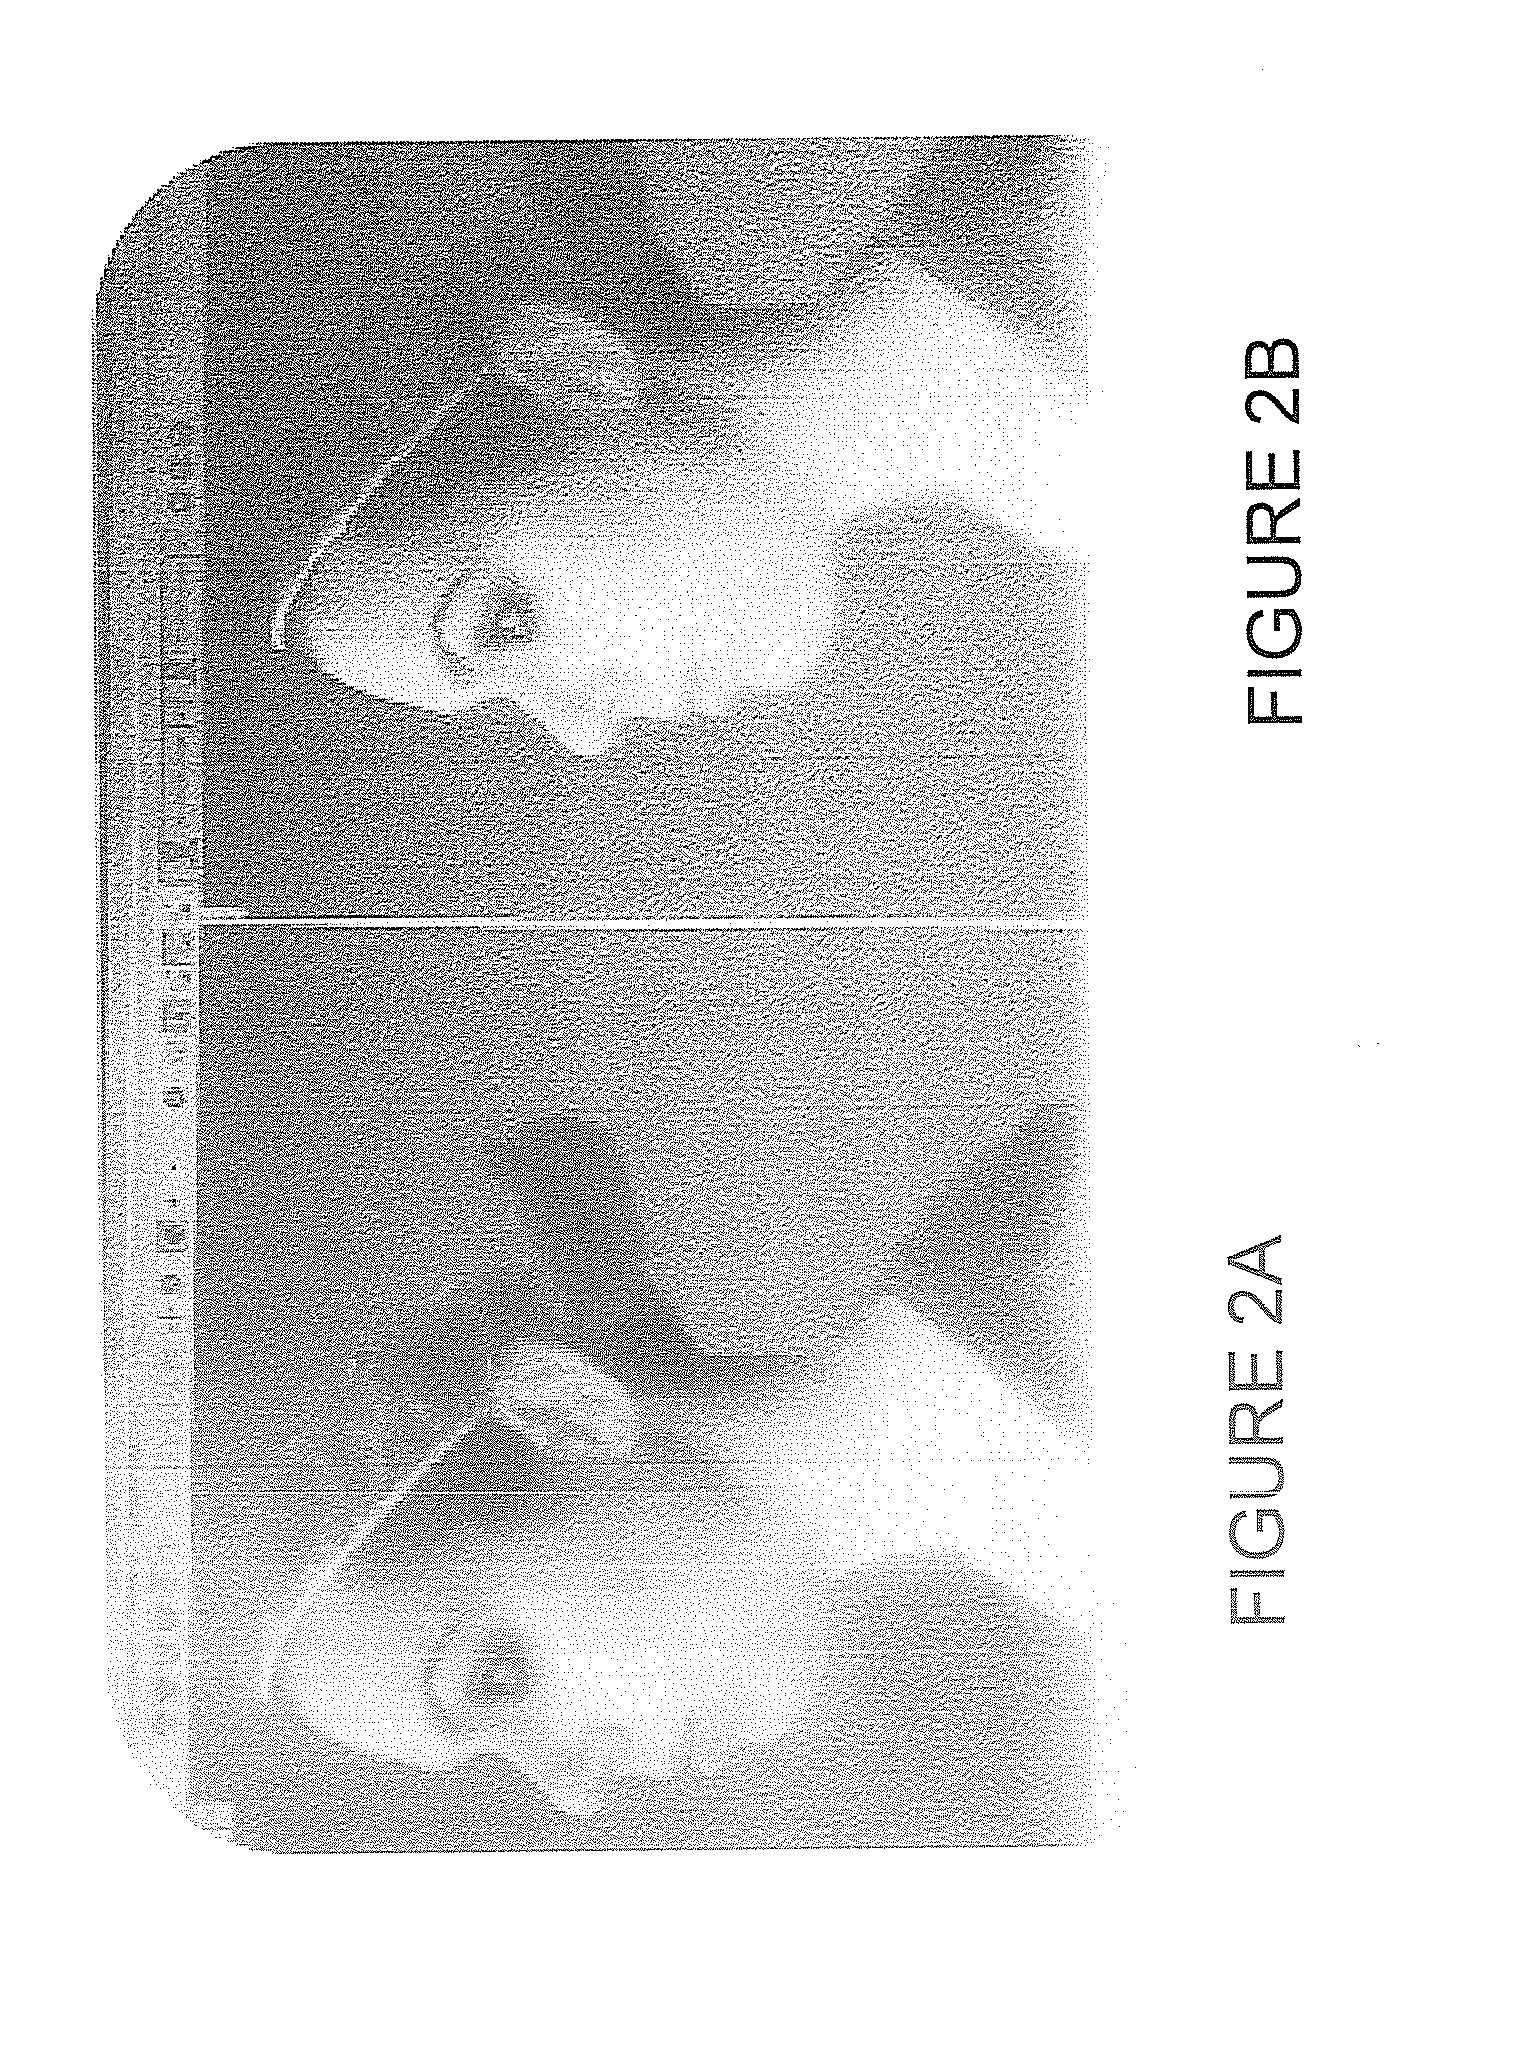 3D design and fabrication system for implants